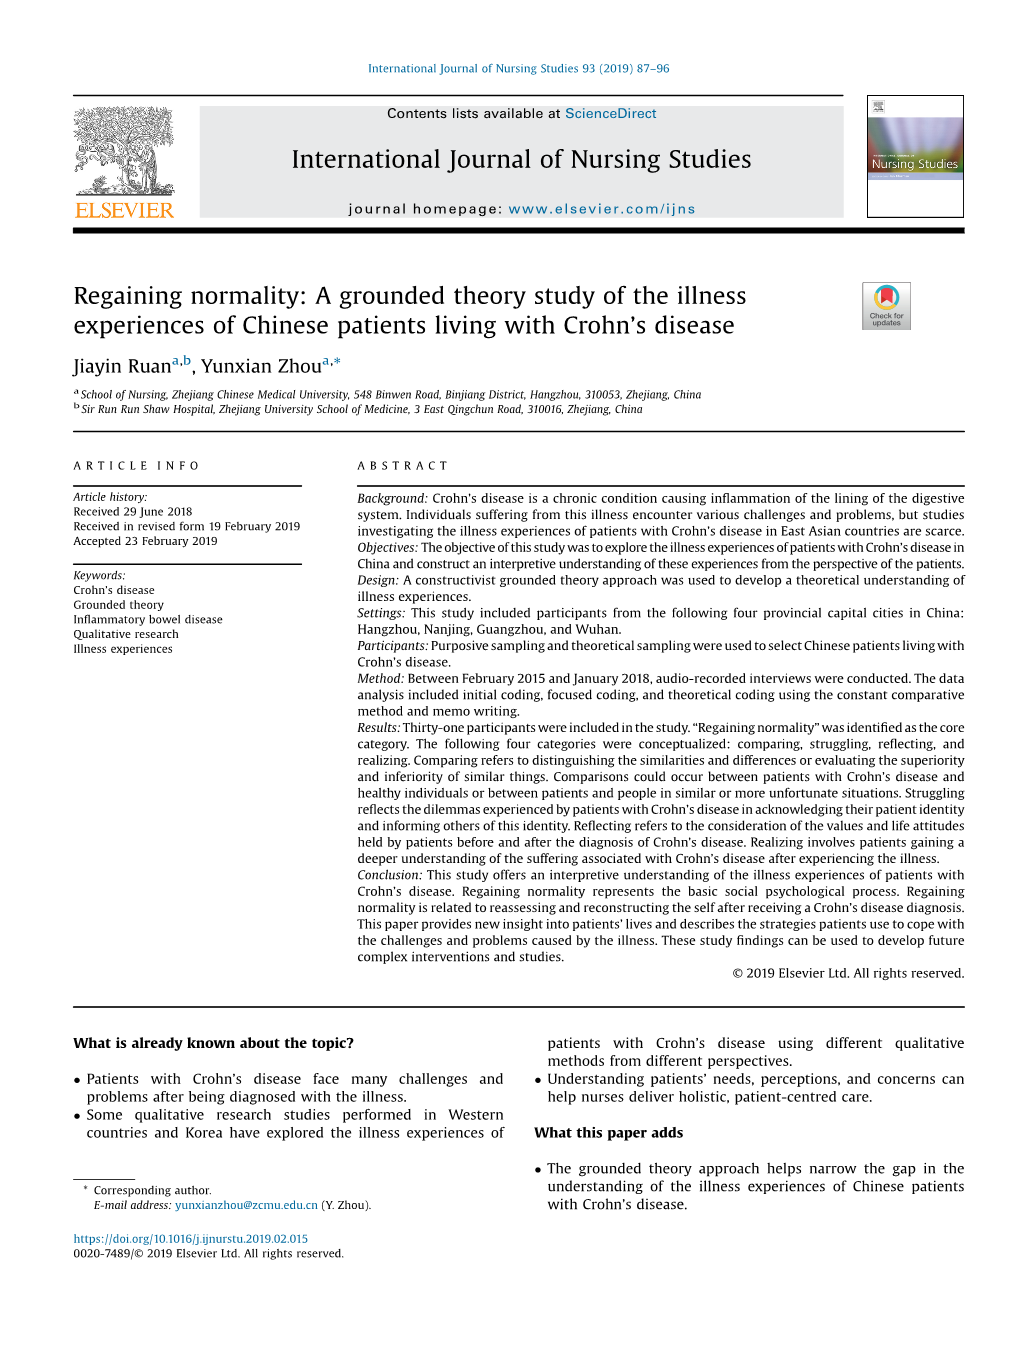 Regaining Normality: a Grounded Theory Study of the Illness